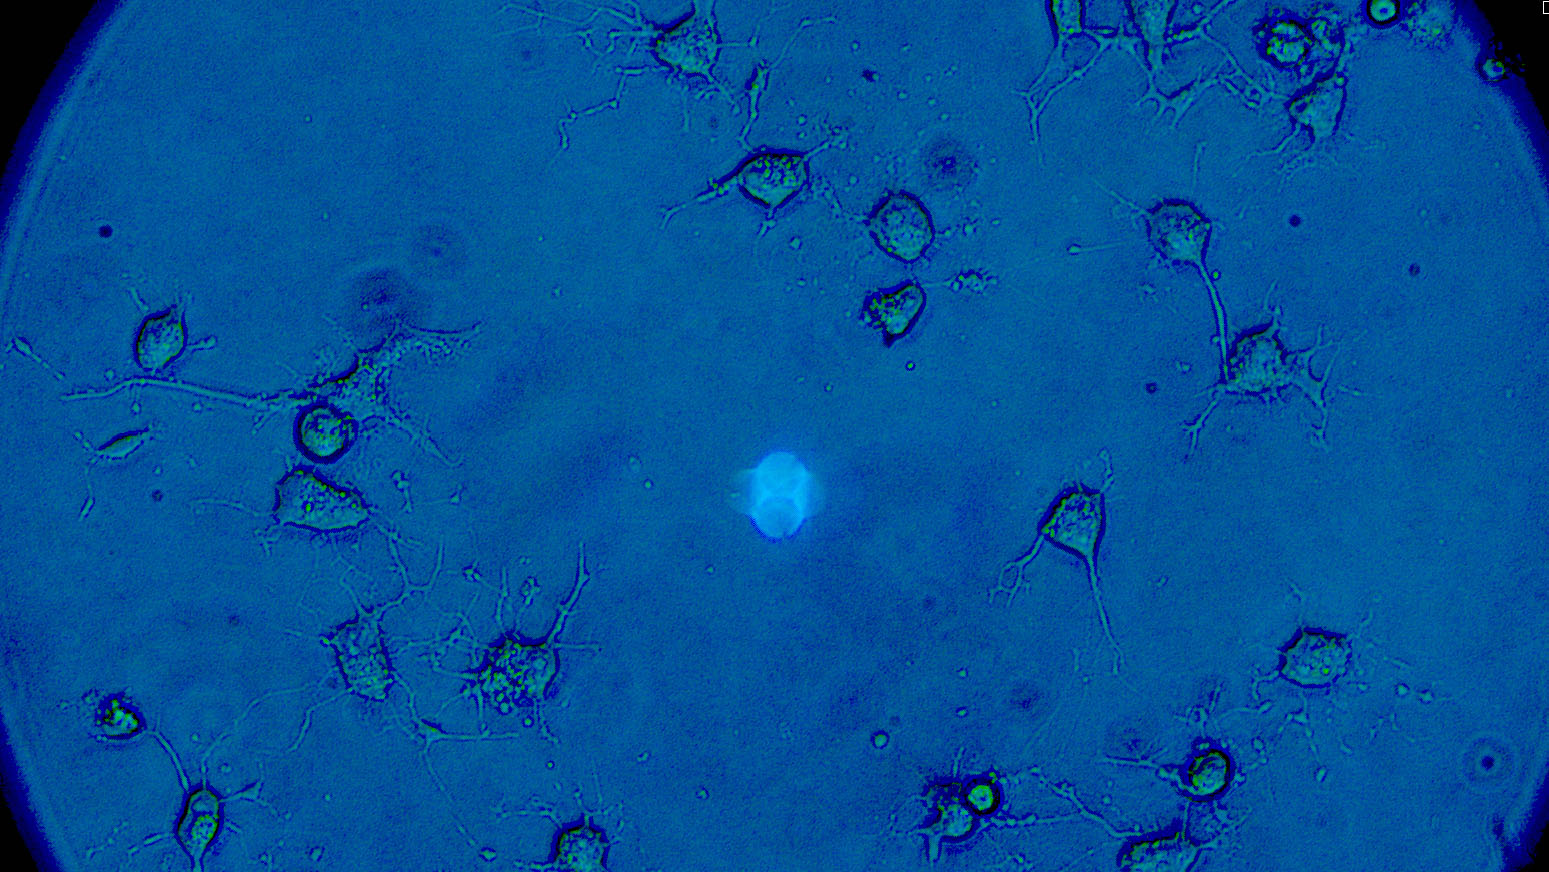 Image of ovarian cancer cells and their invadopodia from a microscope